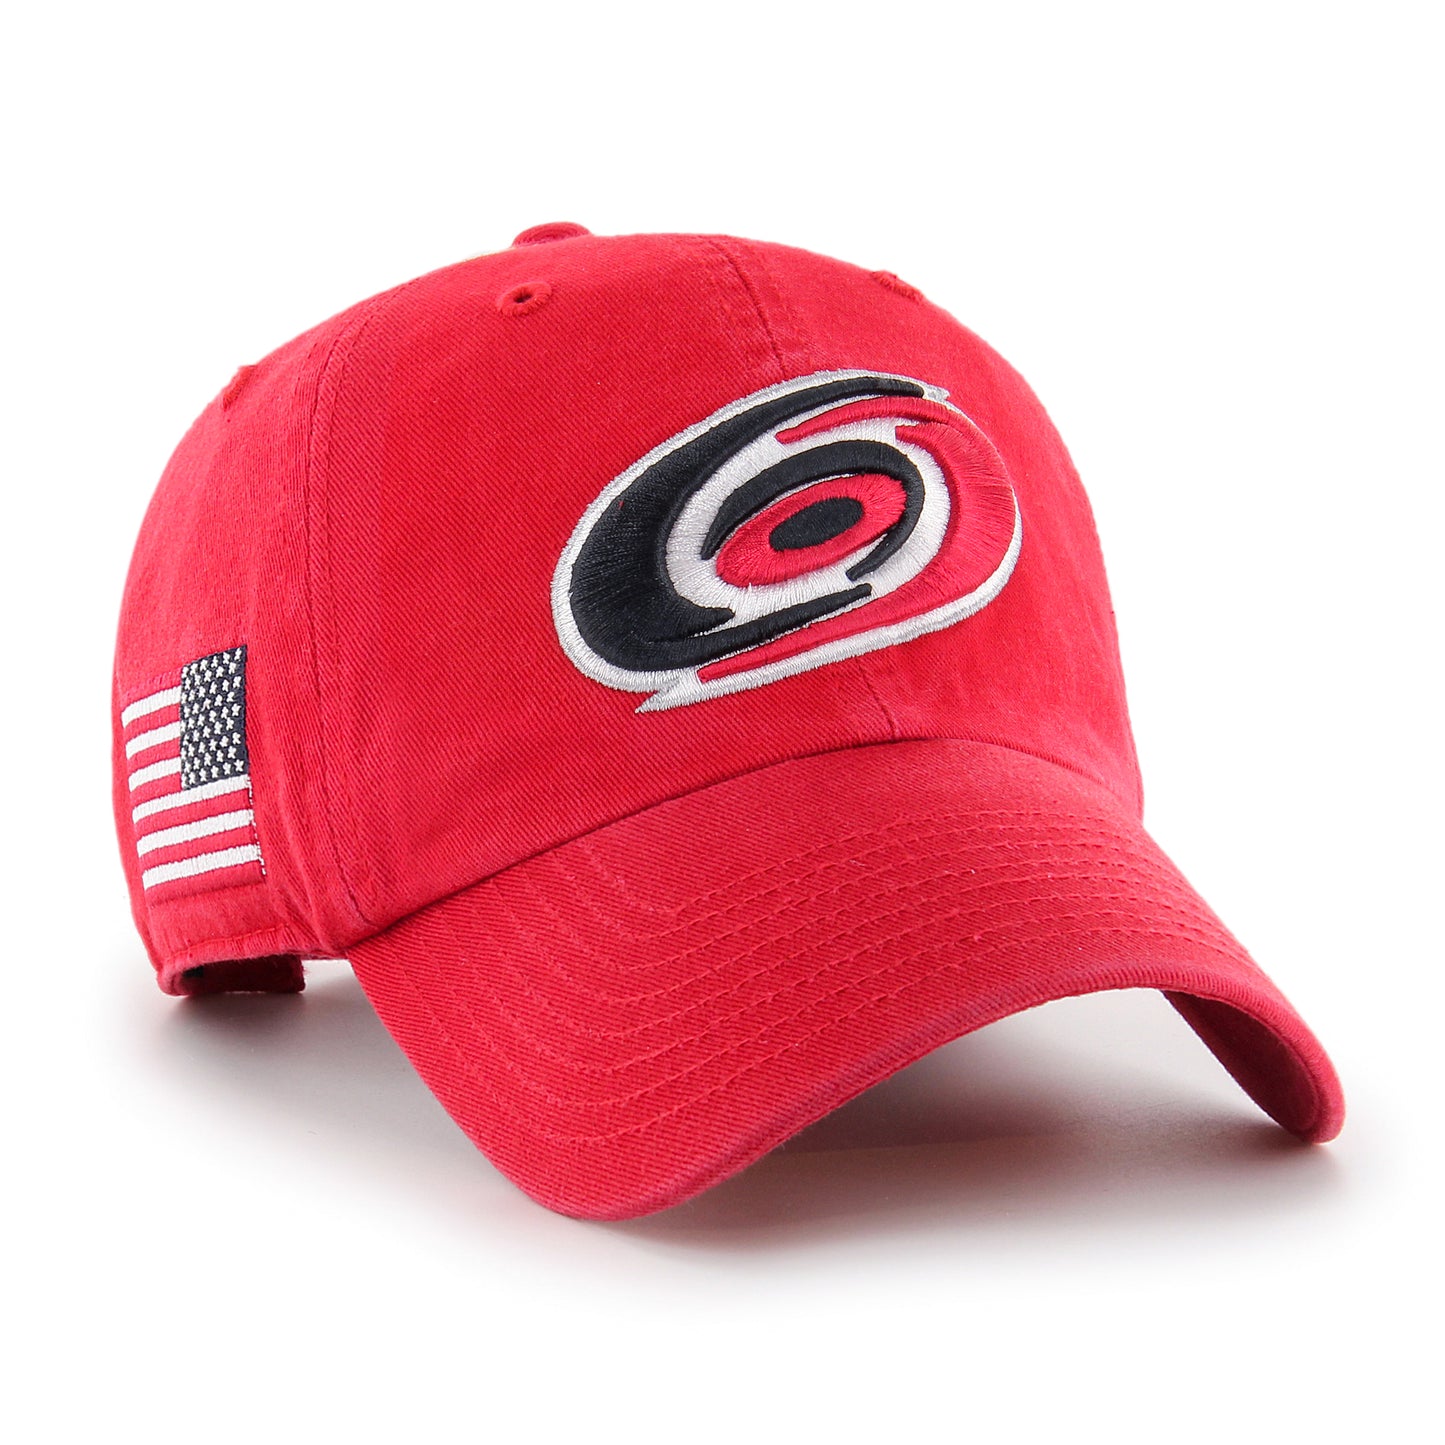 Front view red hat American flag on side primary hurricanes logo on front.